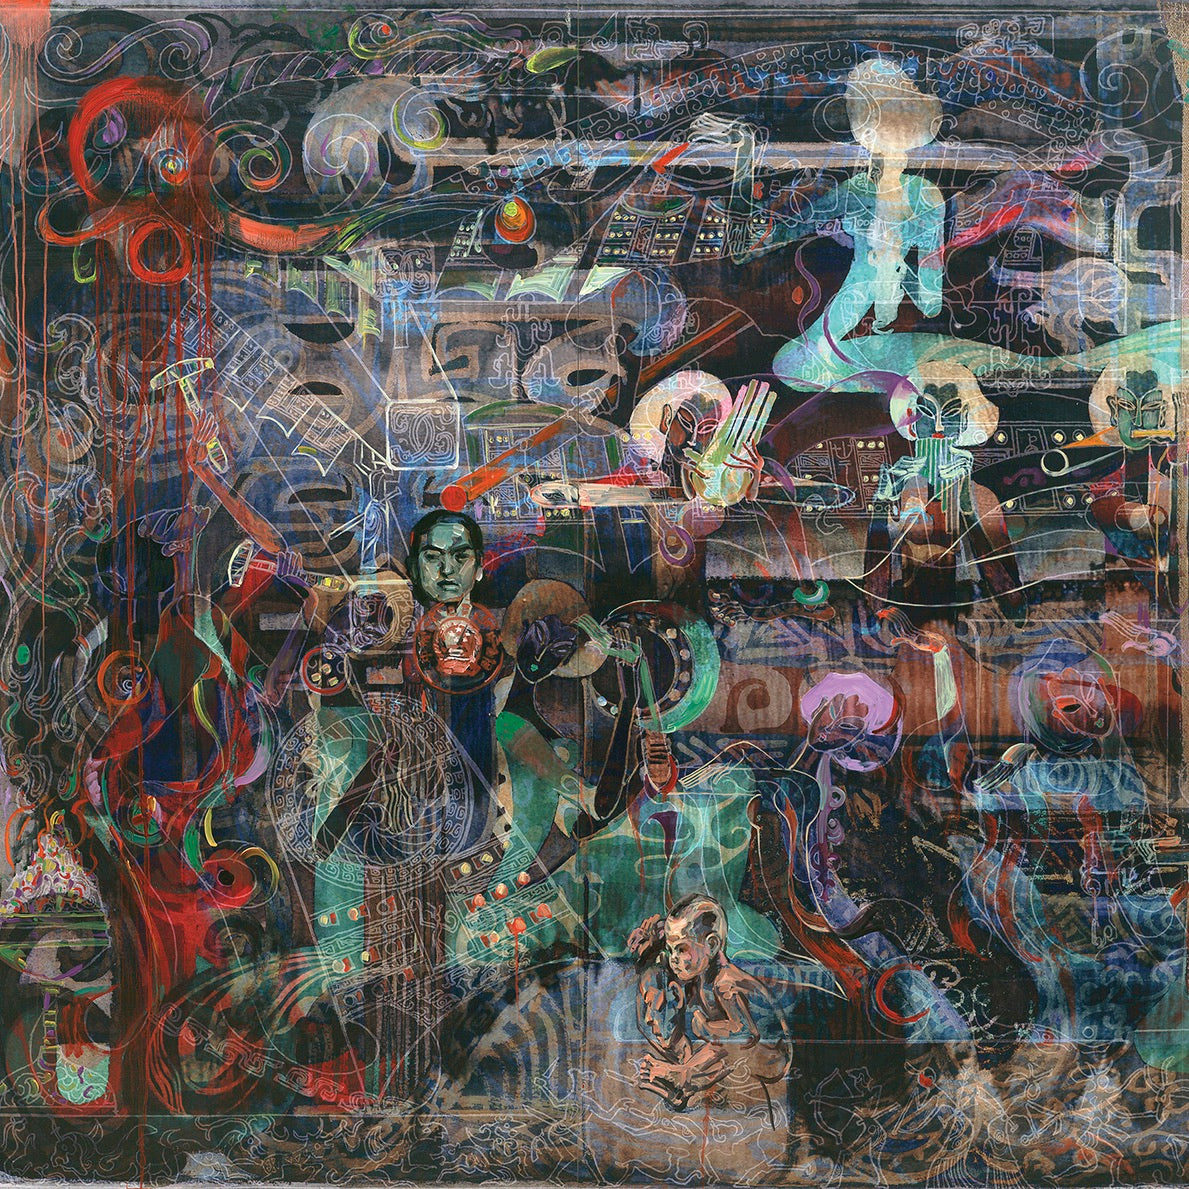 Hung Liu, Music of the Great Earth II, 2008, mixed media on panels (detail)